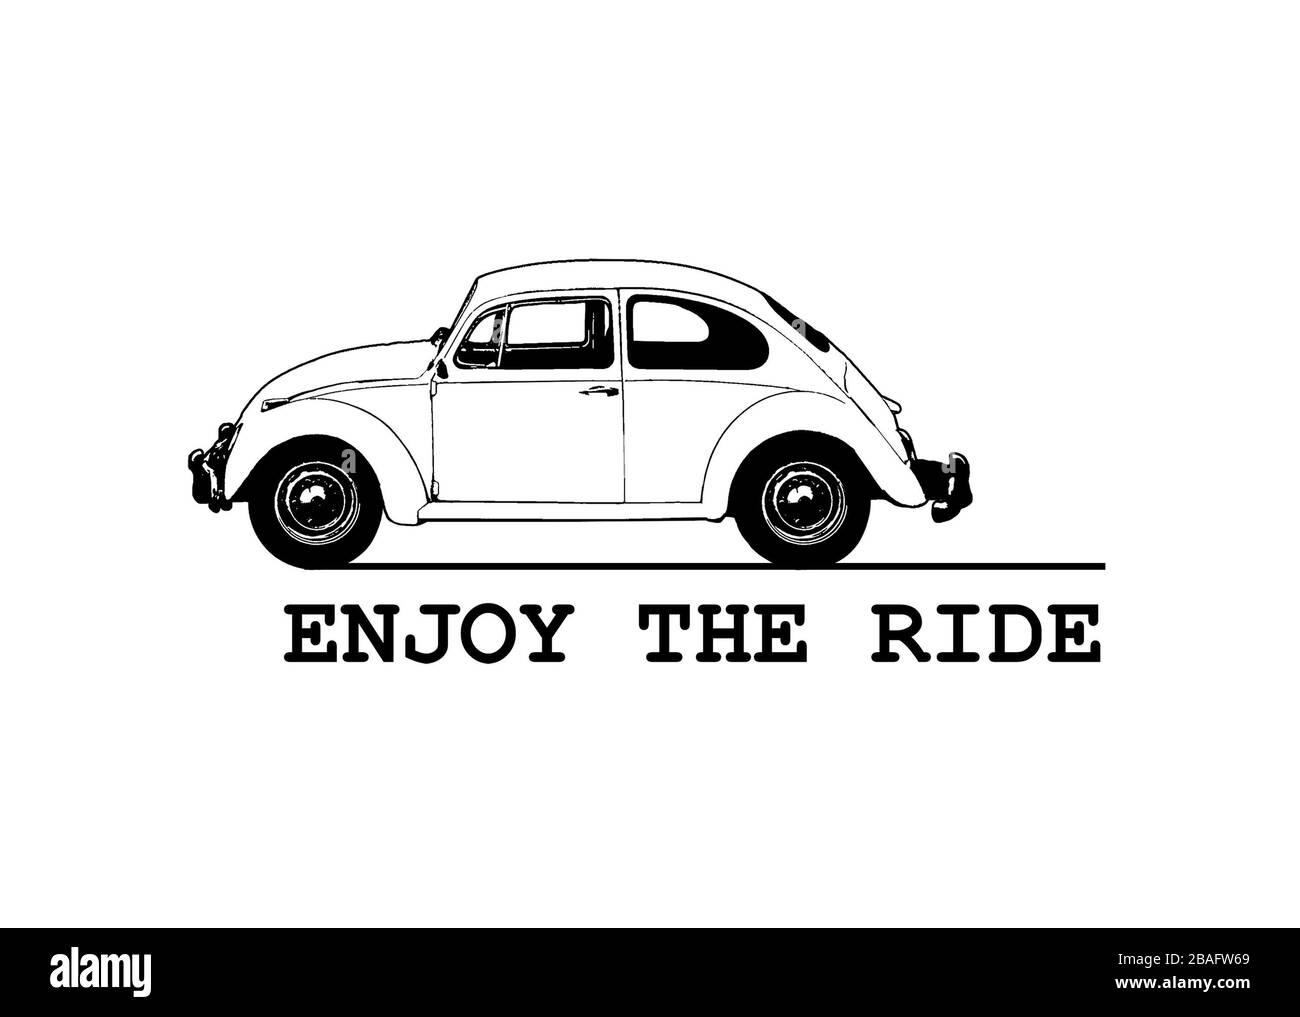 Enjoy the ride typographic concept black and white isolated illustration Stock Photo